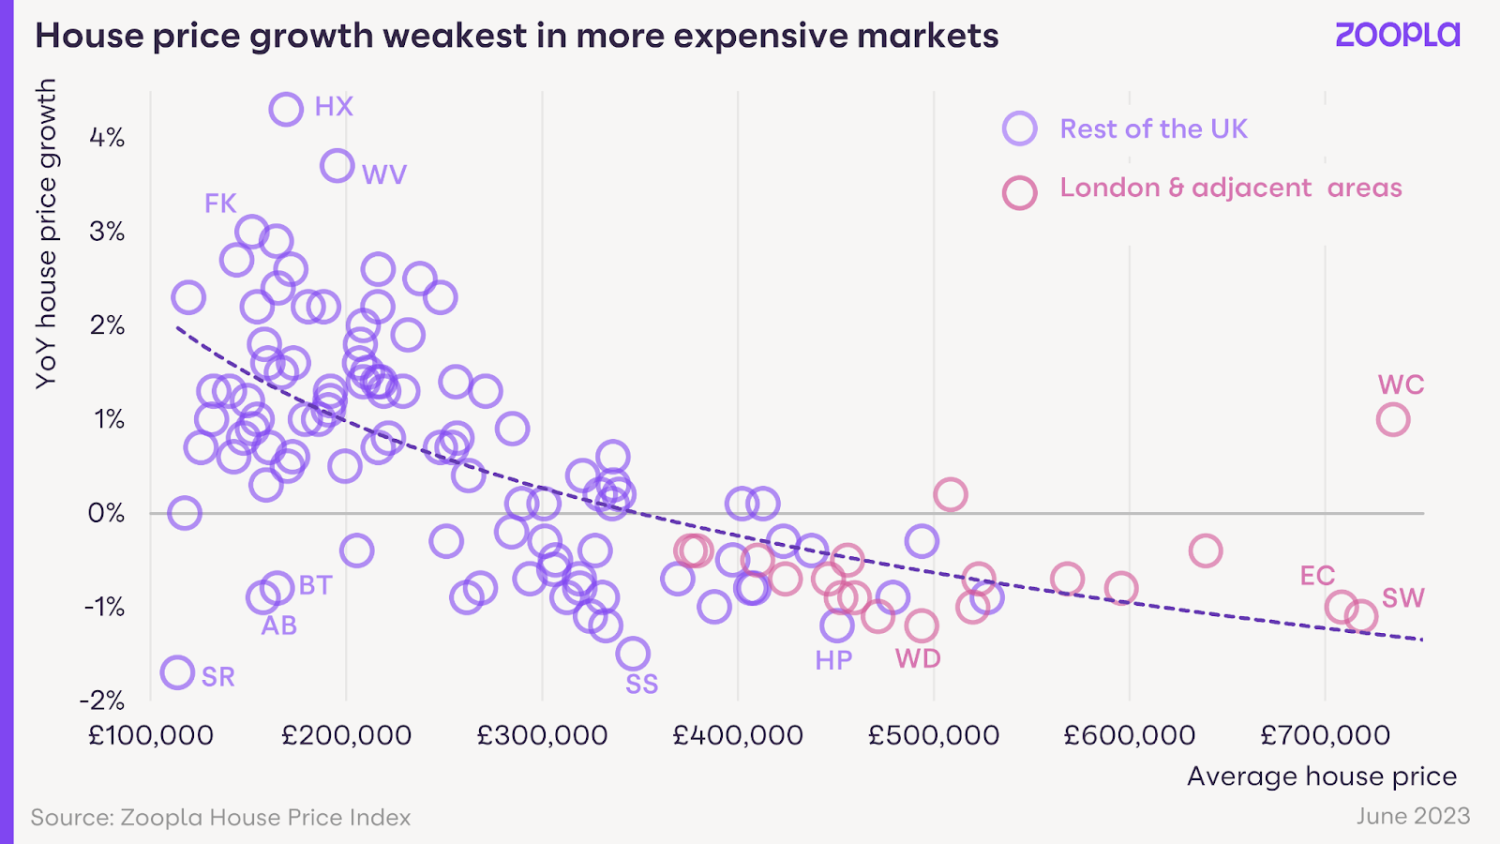 Chart showing how a growth in house prices is slower in more expensive areas like London and the south east